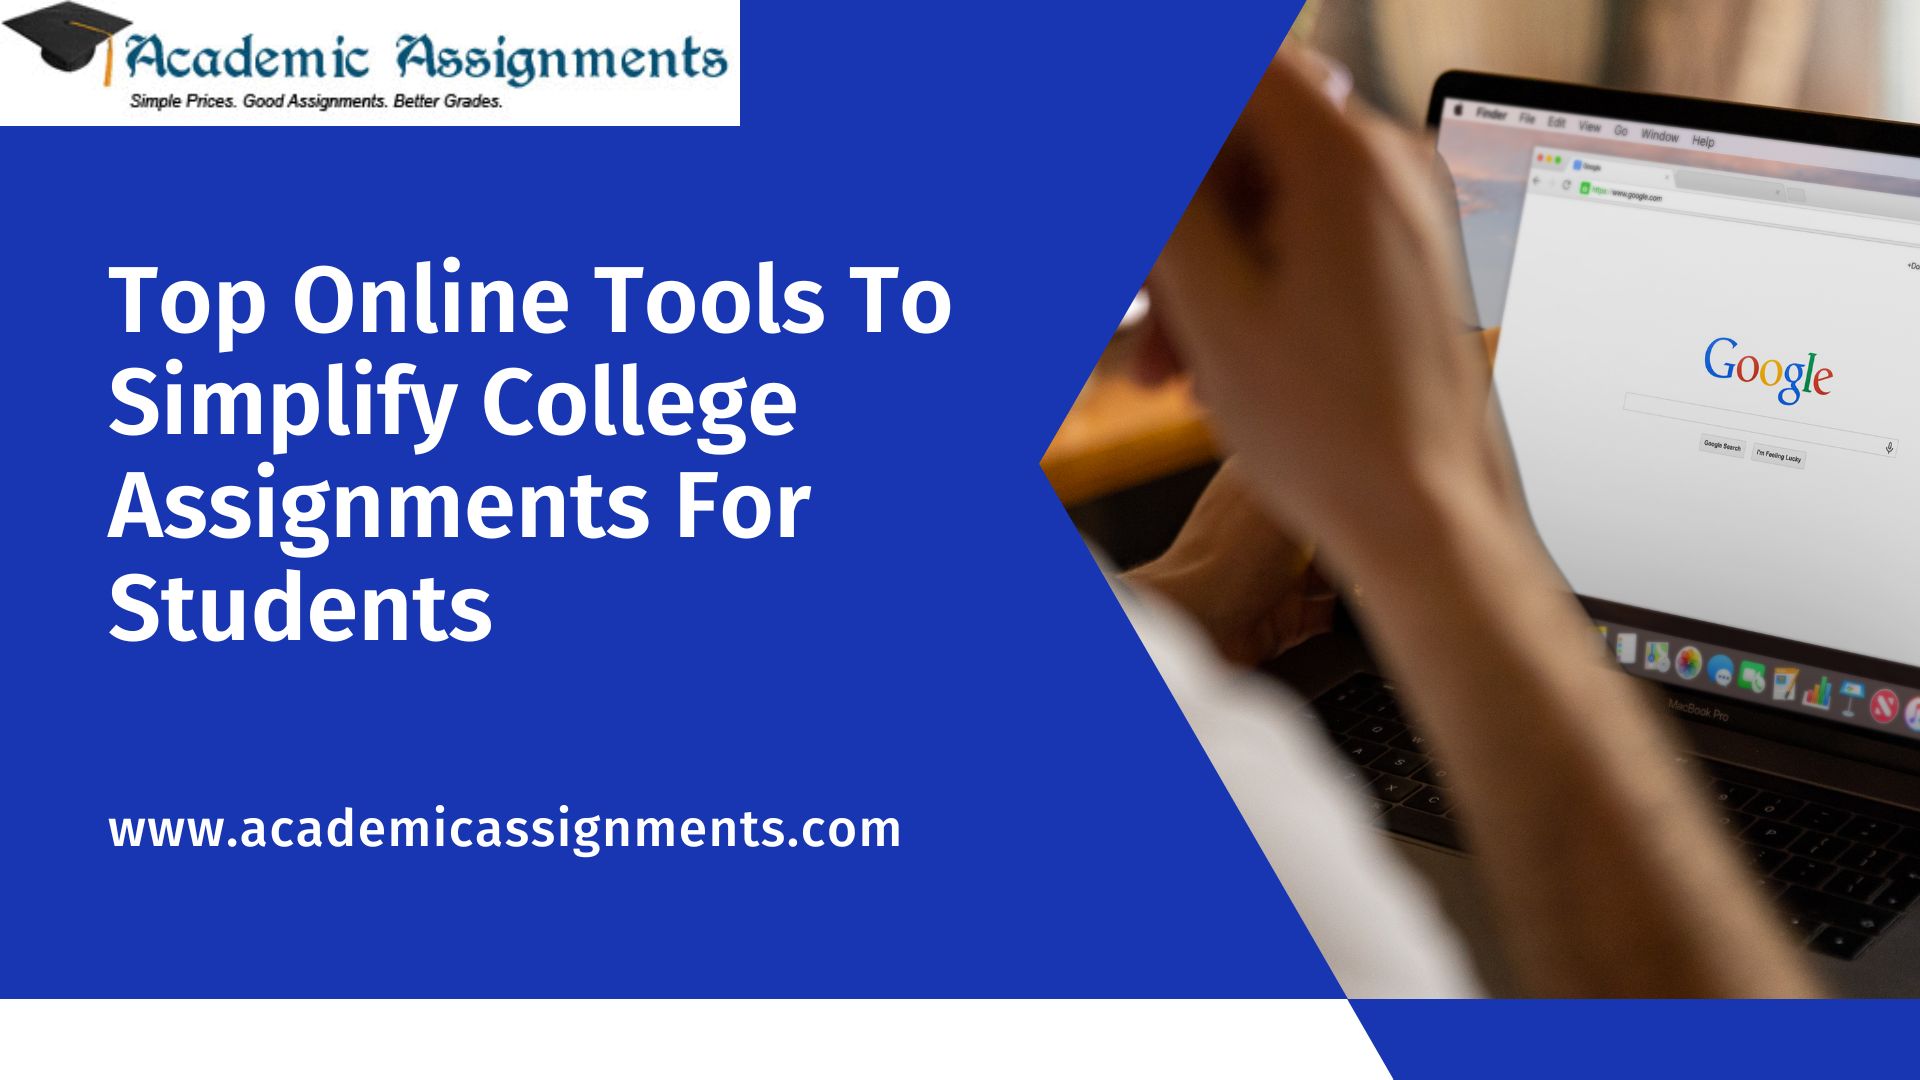 Top Online Tools To Simplify College Assignments For Students